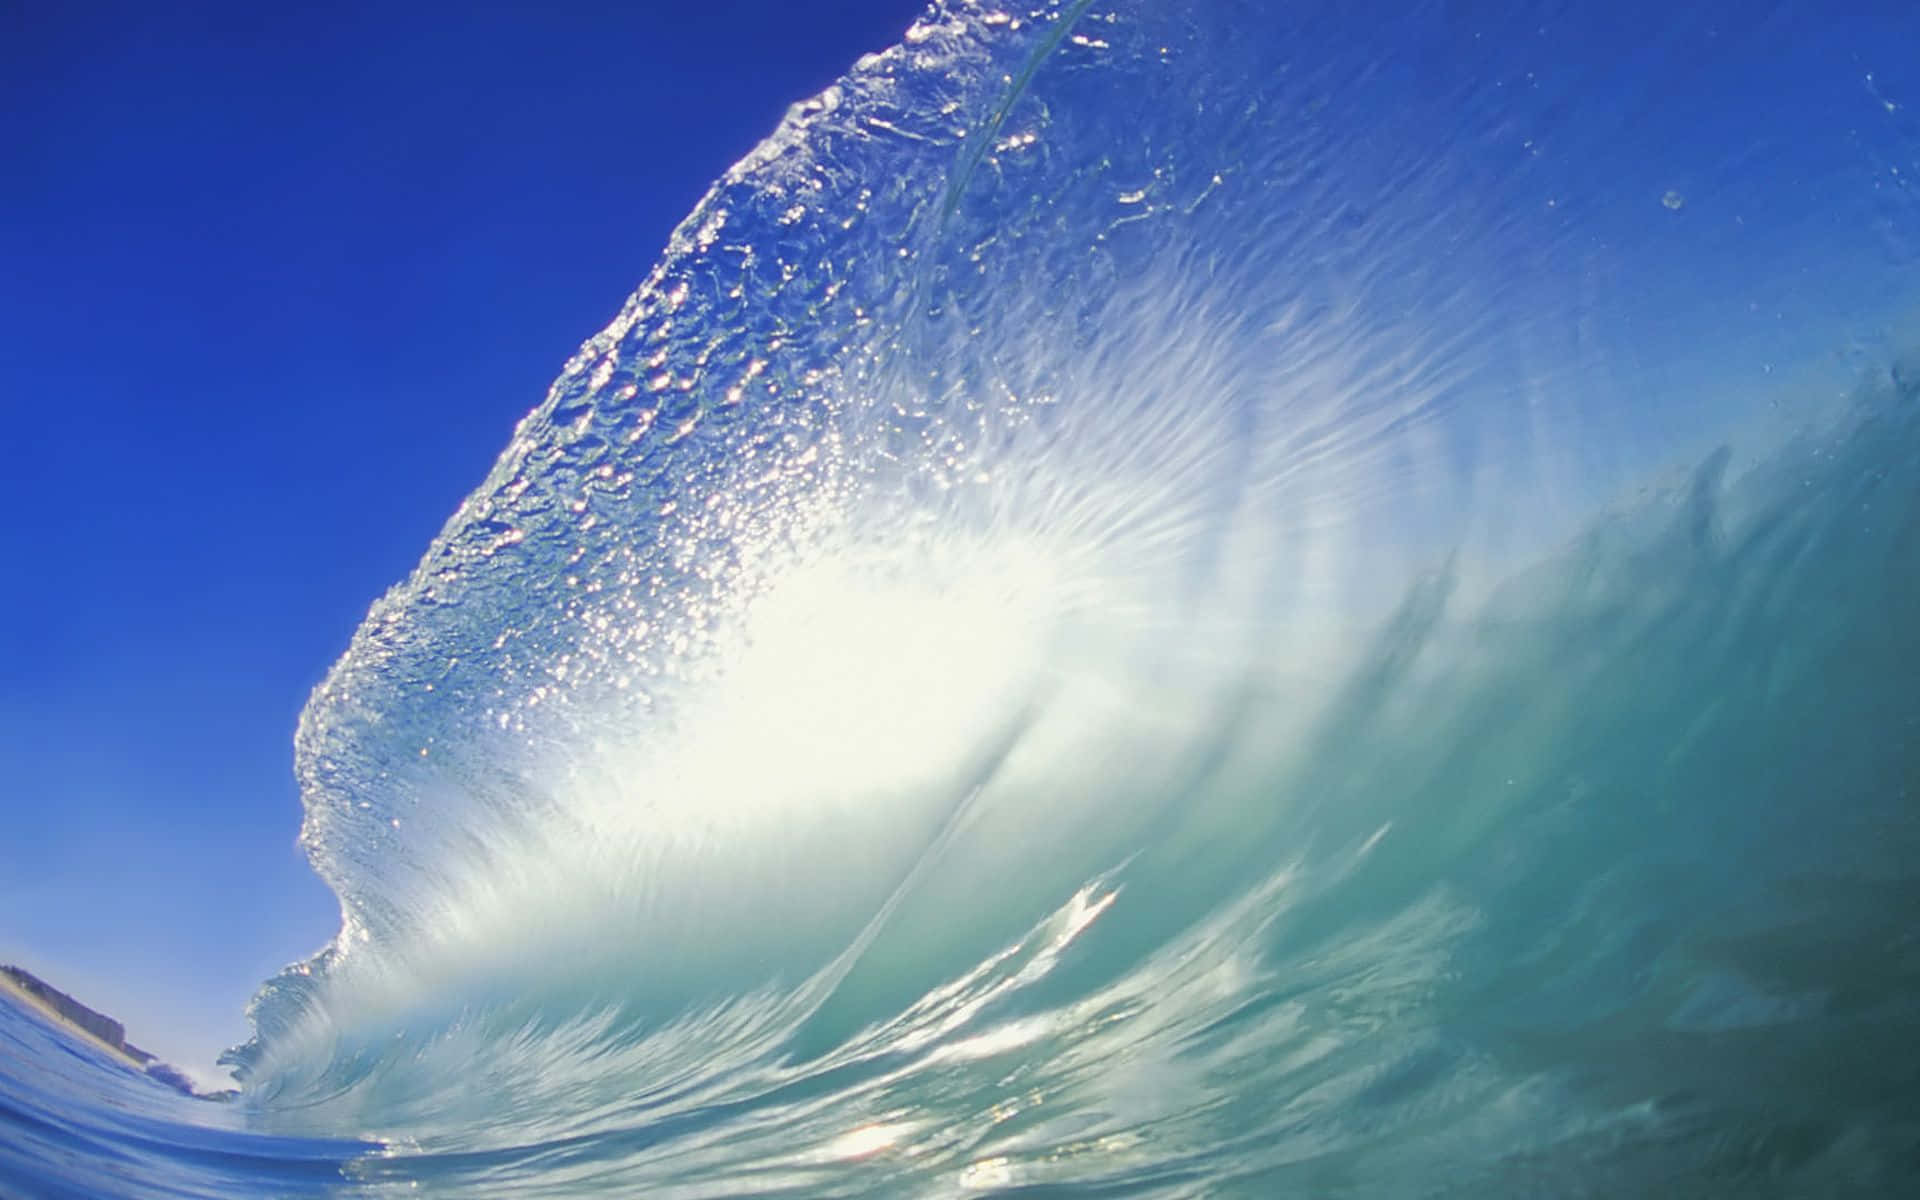 Majestic Ocean Waves in High Resolution